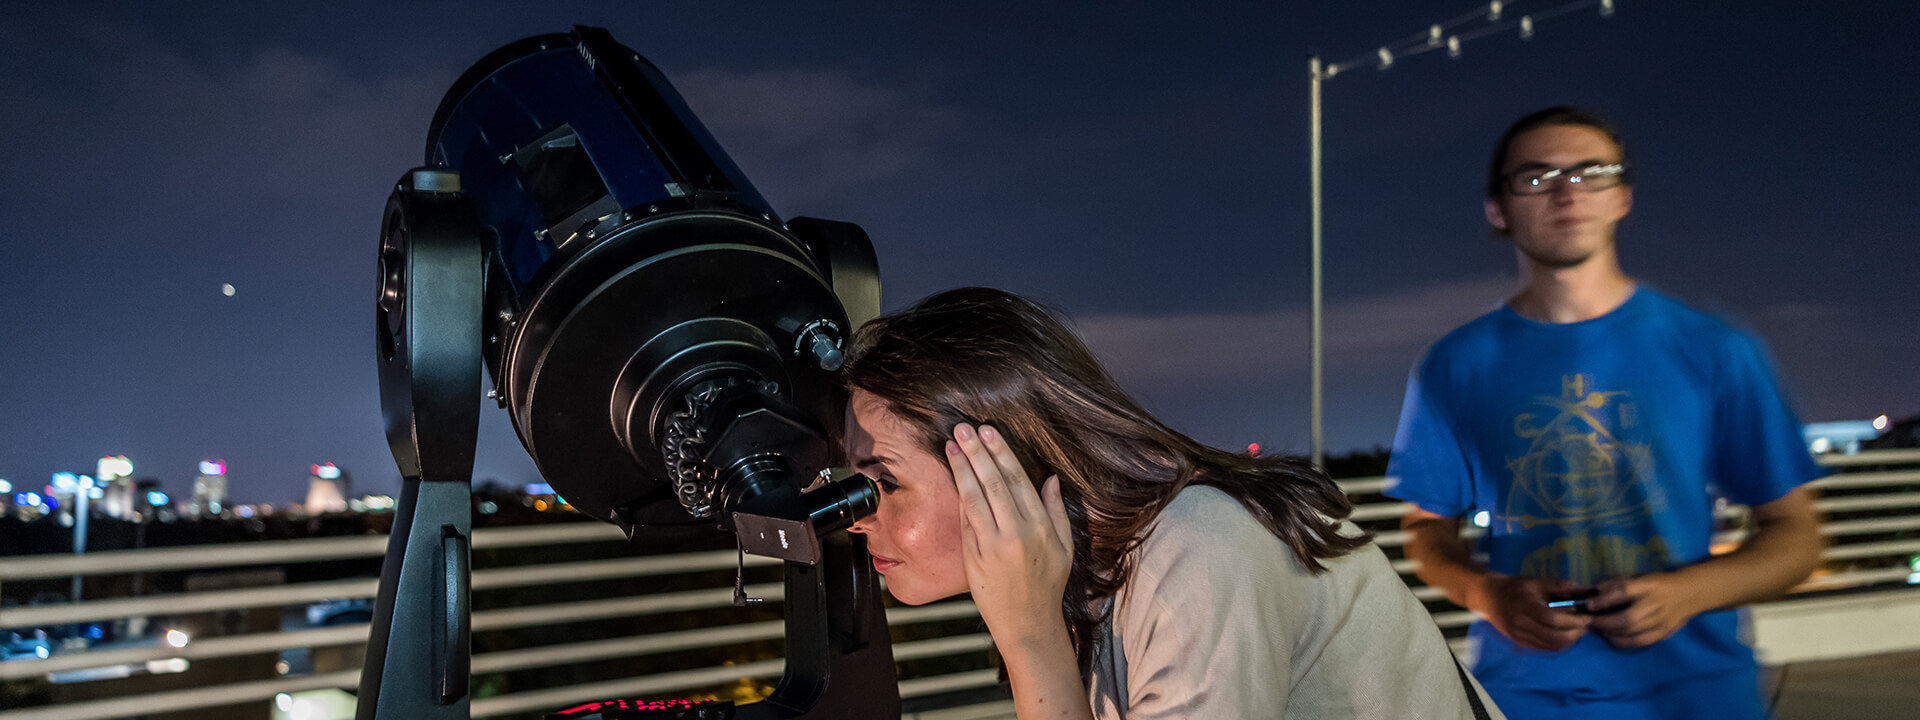 Guest stargazing through telescope outside on the Terrace at Orlando Science Center.